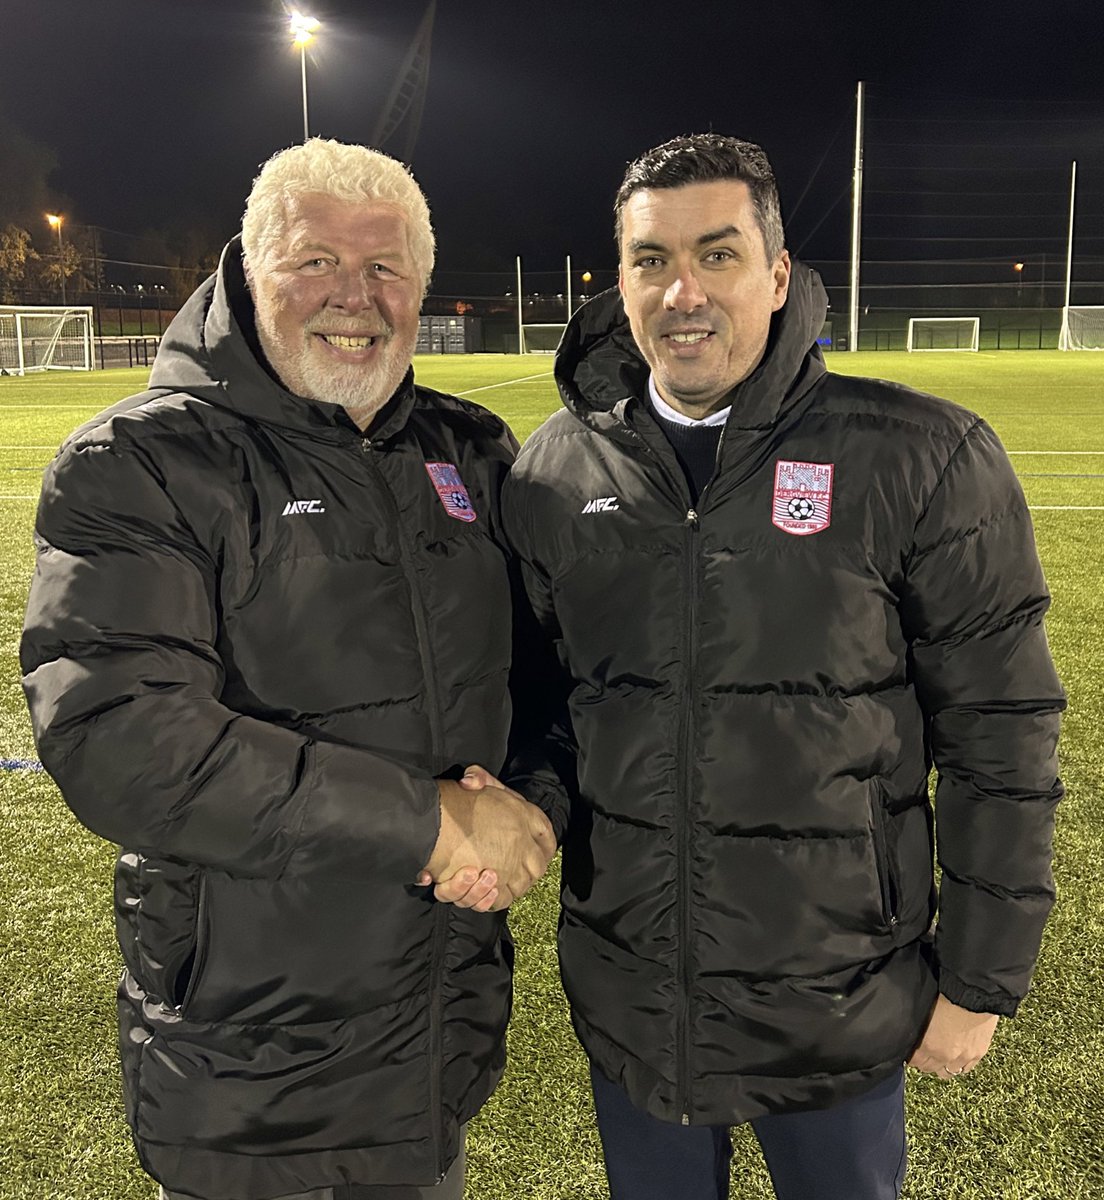 Emmet Friars is the new Dergview manager. Dergview Football Club are delighted to announce that Emmet Friars is our new 1st team manager. Welcome to Dergview Emmet!